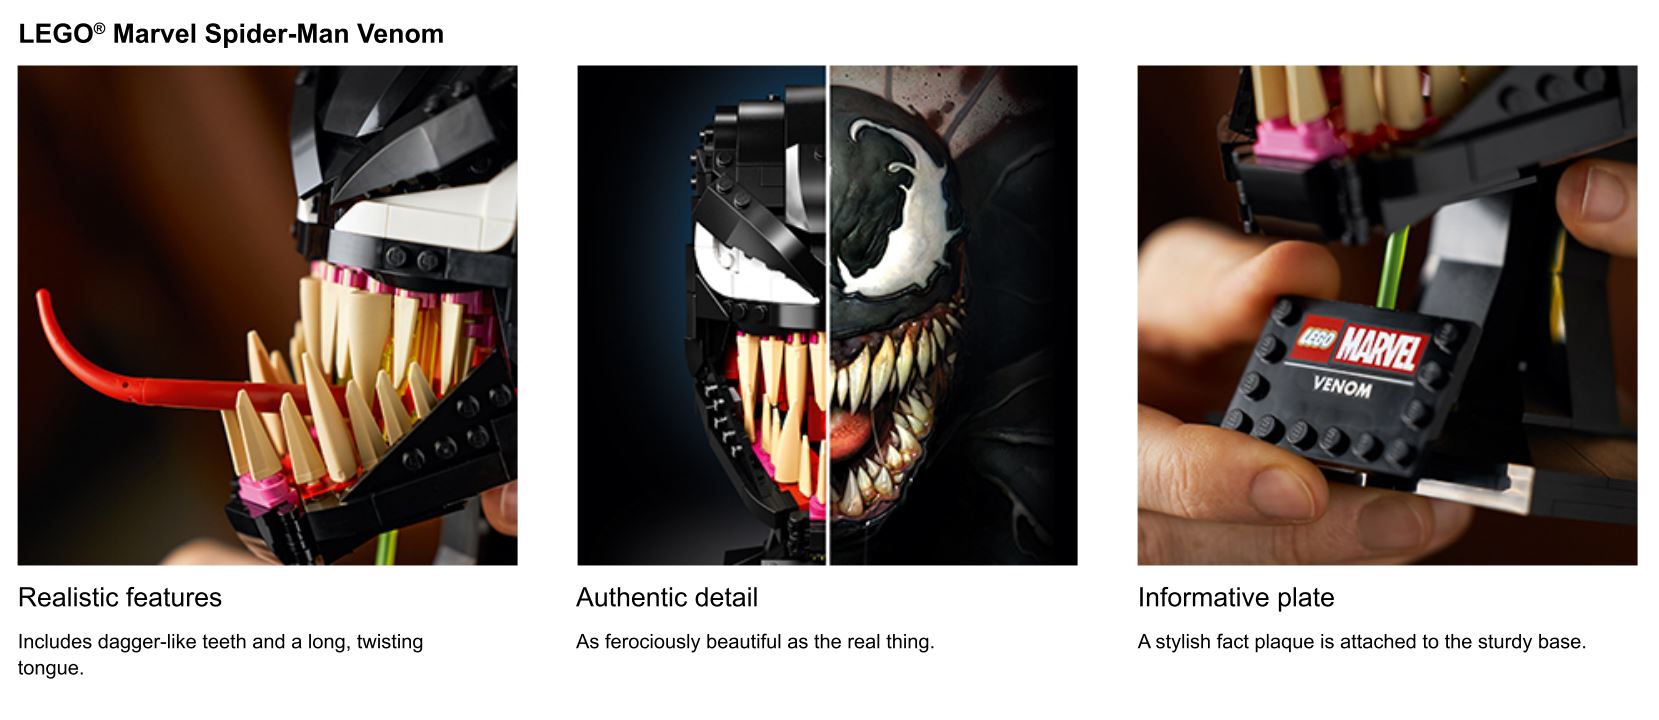 3 images of the Lego set, one of them is comparing the lego set to a digital rendering of Venom. Text reads. LEGO Marvel Spider-Man Venom. Realistic features, Includes dagger-like teeth and long, twisting tongue. Authentic detail, As ferociously beautiful as the real thing. Informative place, A stylish fact plaque is attached to the sturdy base.